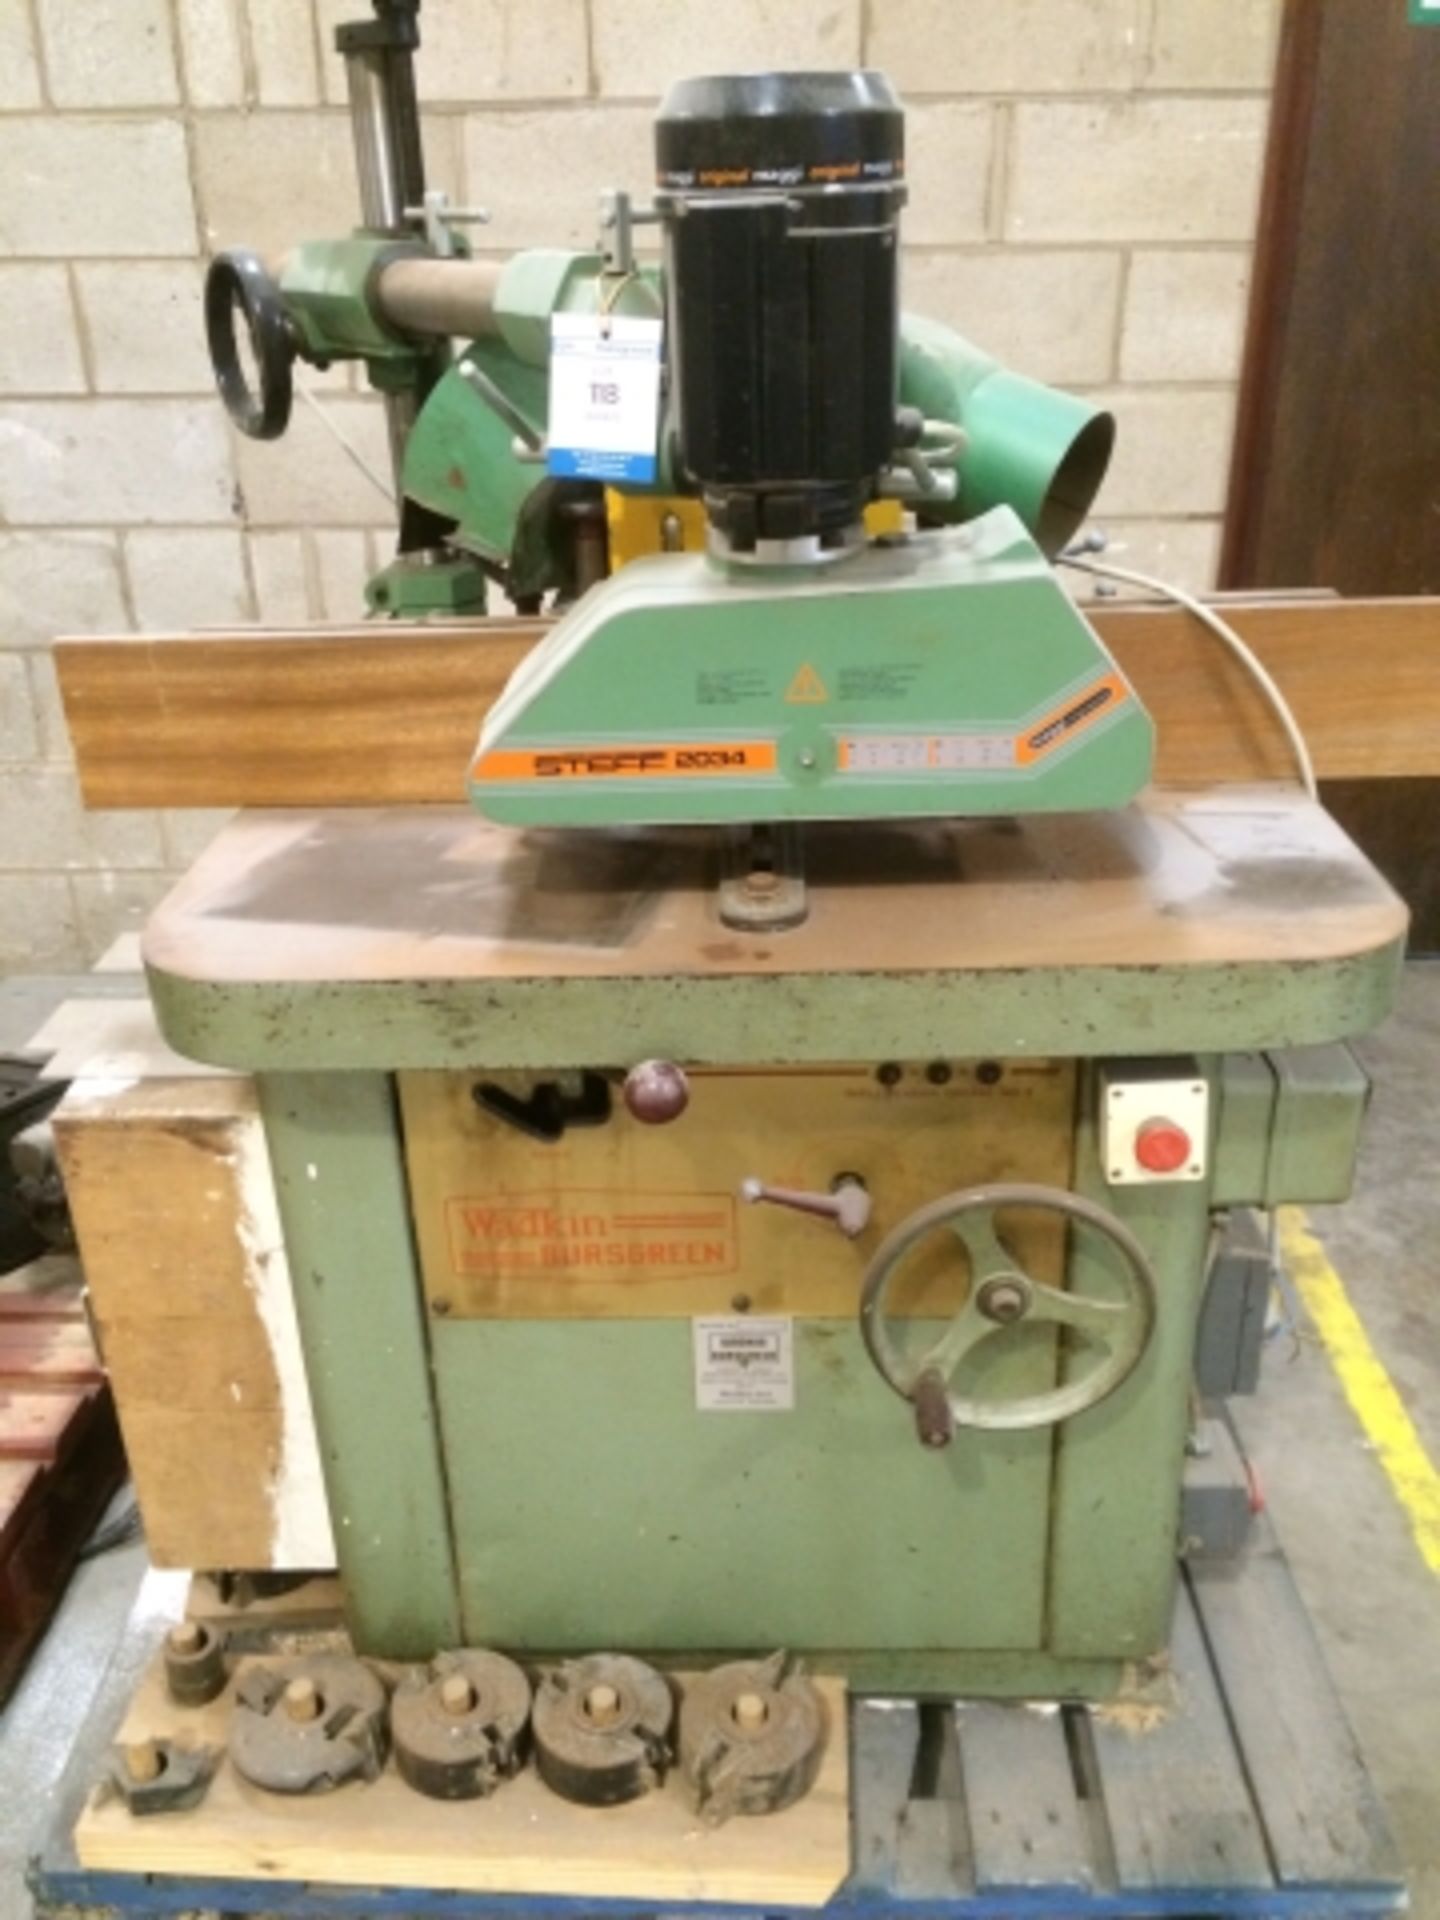 * Wadkin Bursgreen BER3 spindle moulder S/N 751492 fitted with Steff 2034 power feed unit and with